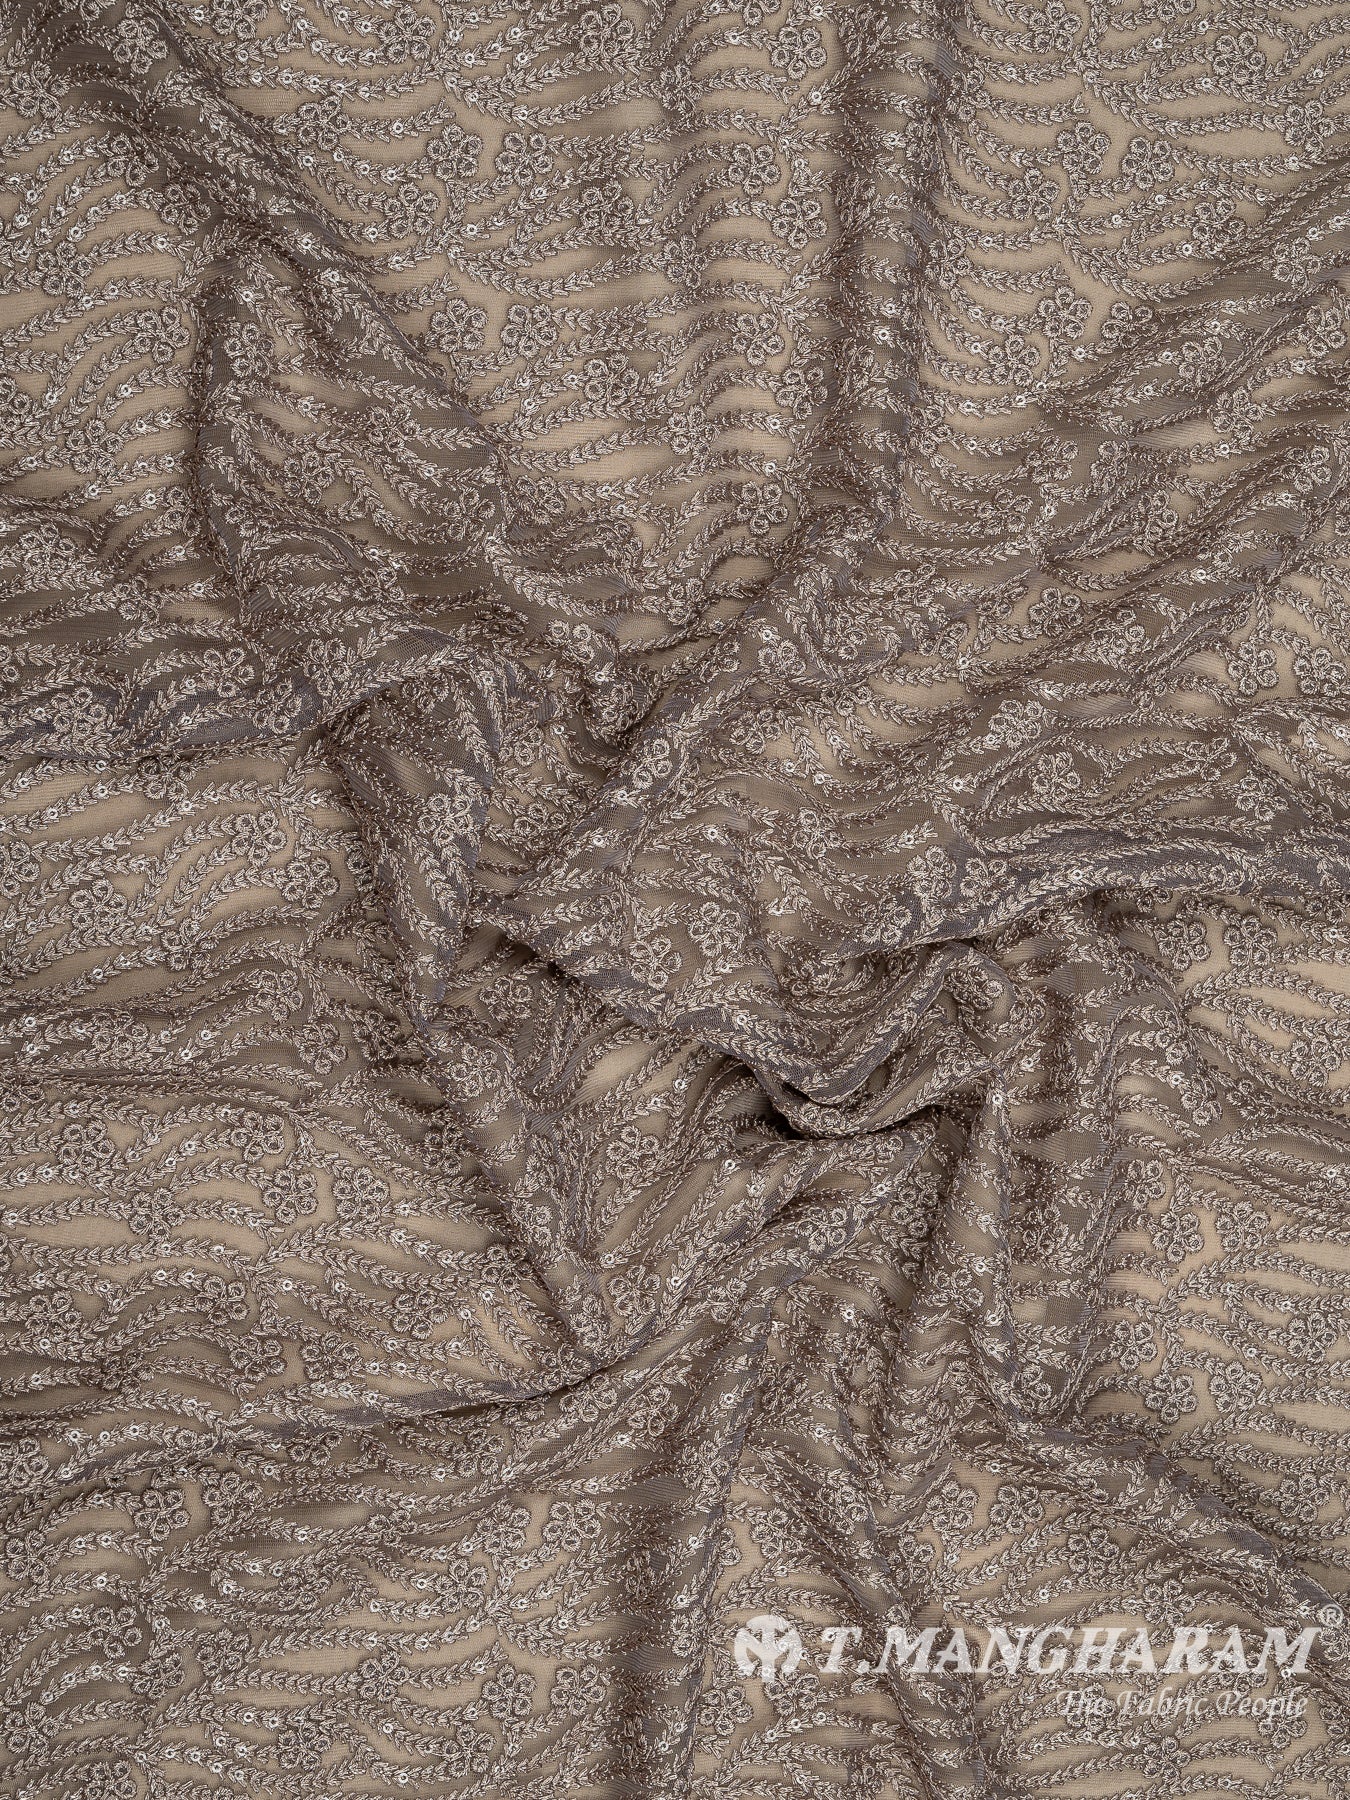 Beige Net Embroidery Fabric - EC8428 view-4